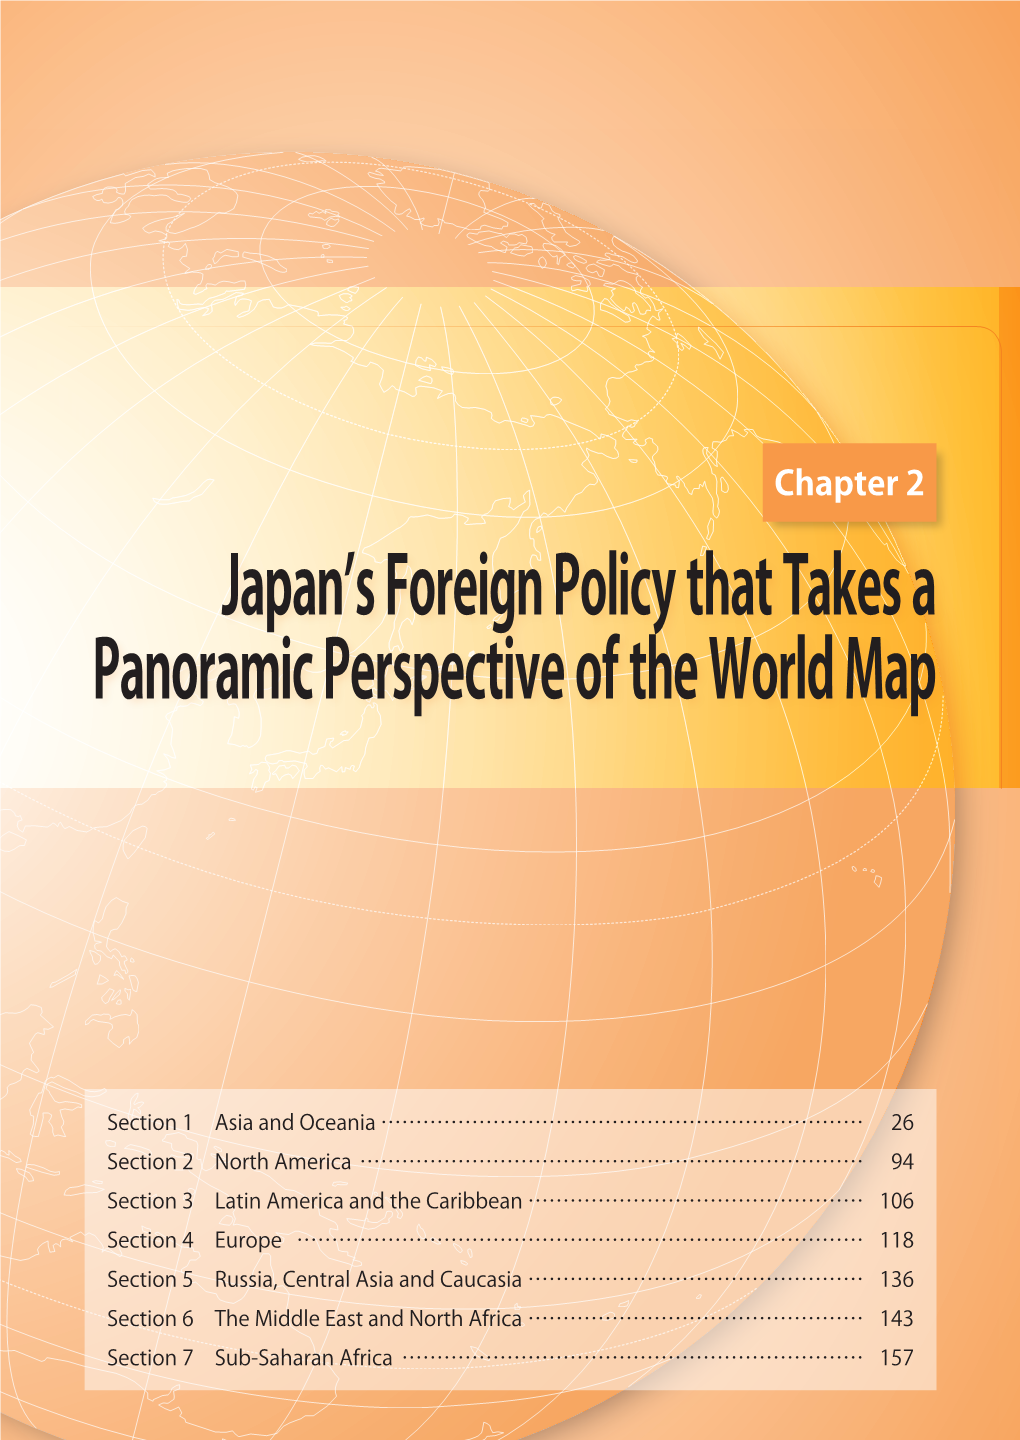 Chapter 2 Japan's Foreign Policy That Takes a Panoramic Perspective Of